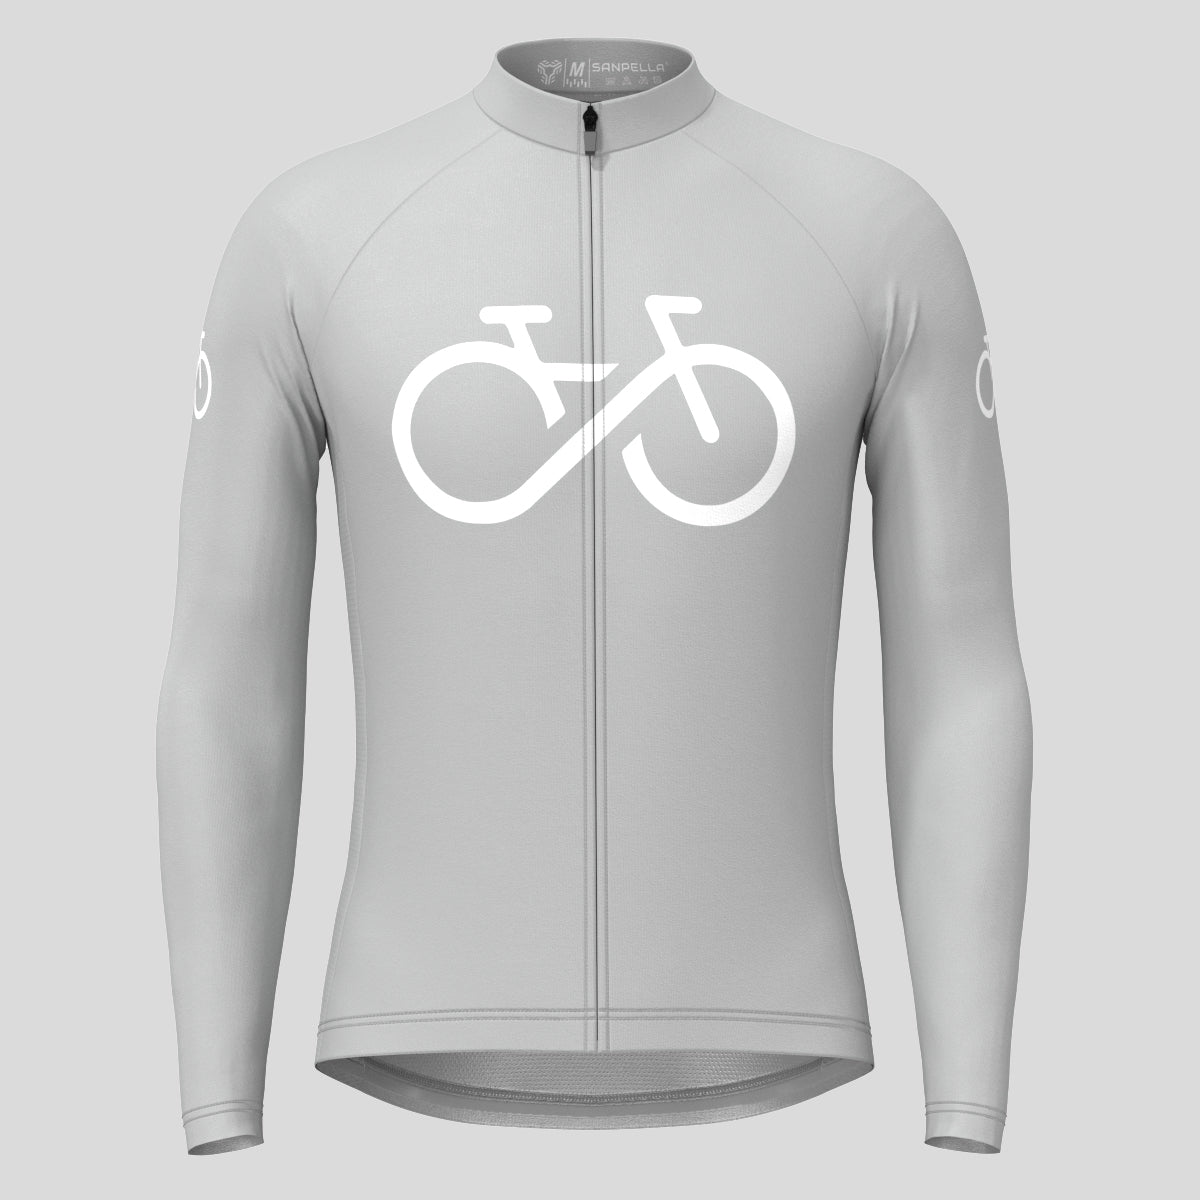 Bike Forever Men's LS Cycling Jersey - Gray